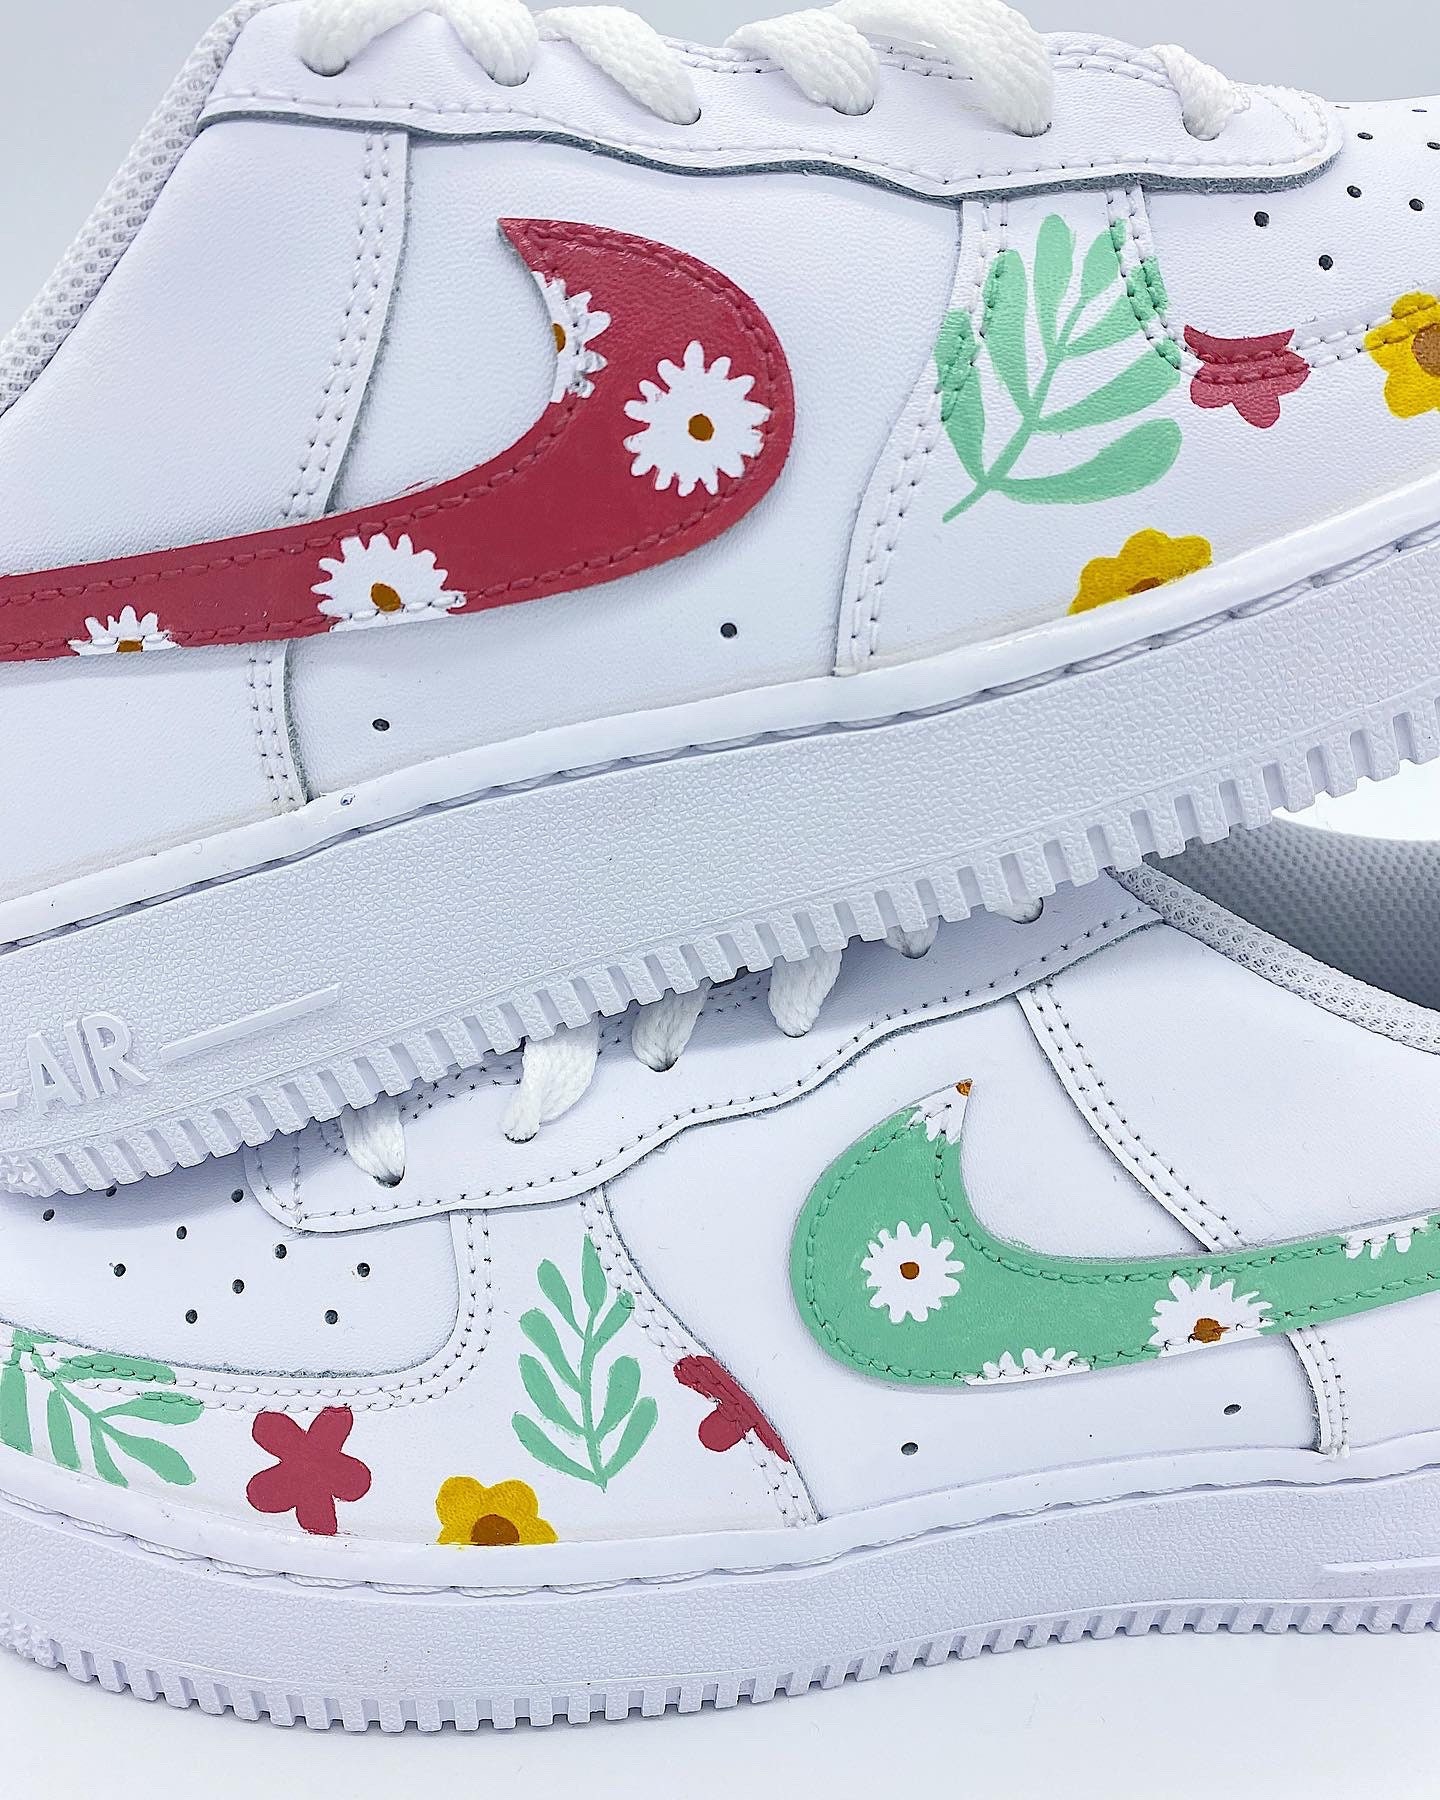 Woven Floral Panels Take Over This Women's Nike Air Force 1 Low